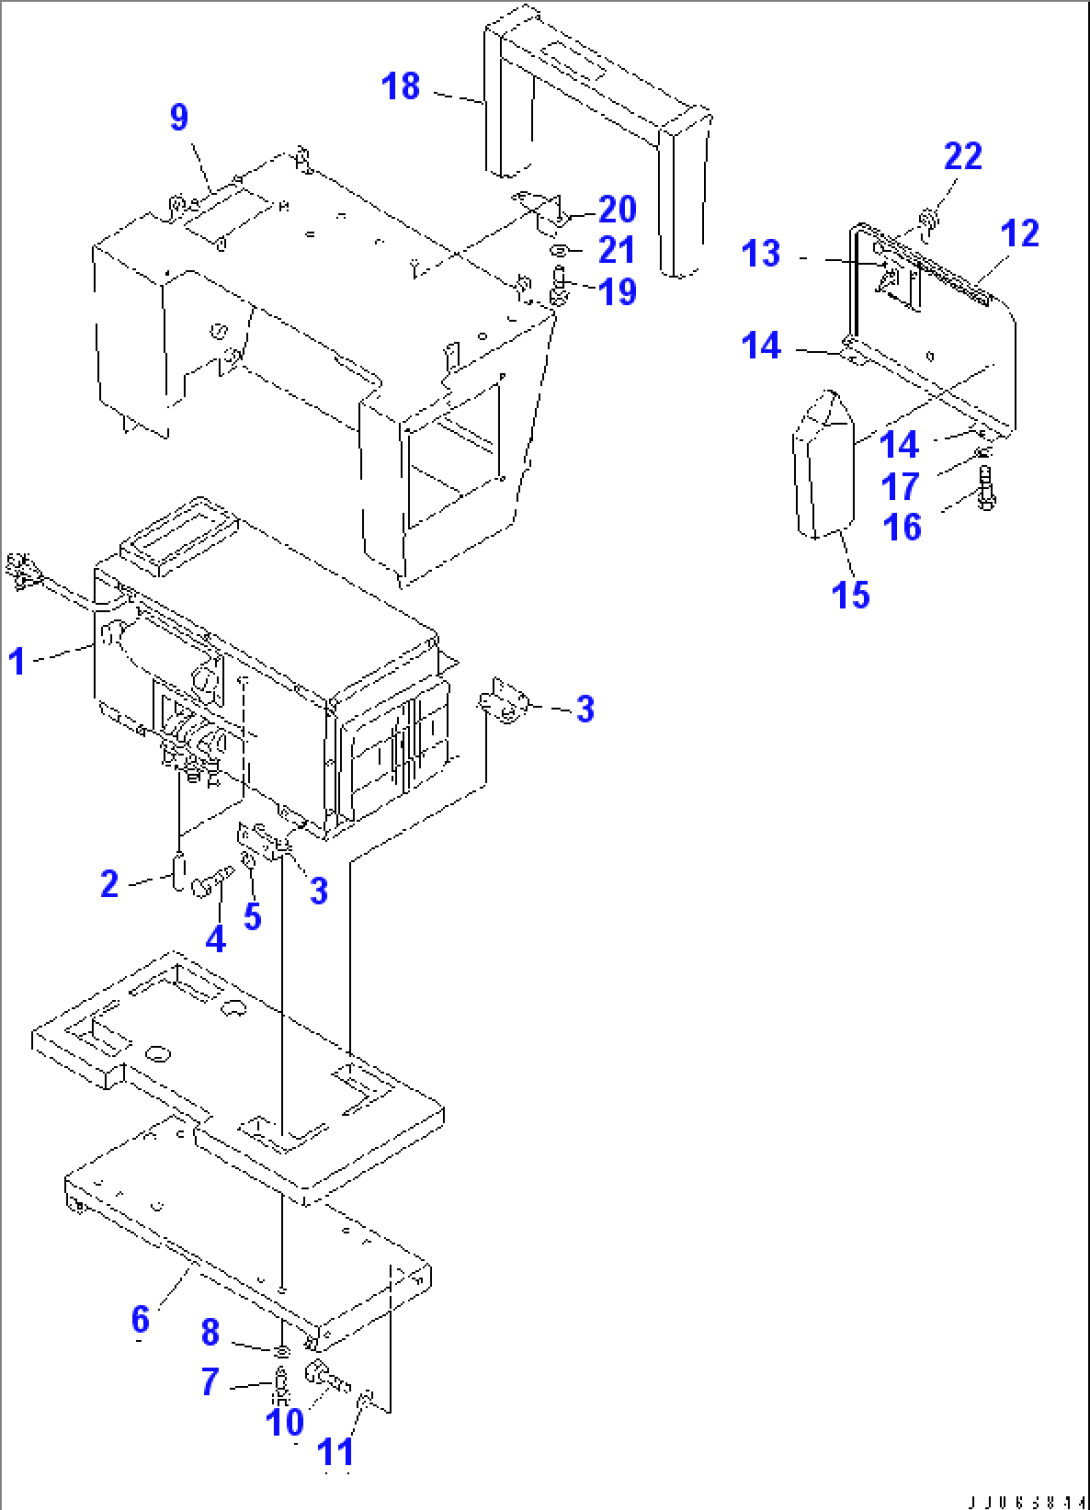 AIR CONDITIONER (AIR CONDITIONER UNIT AND MOUNTING)(#90001-)